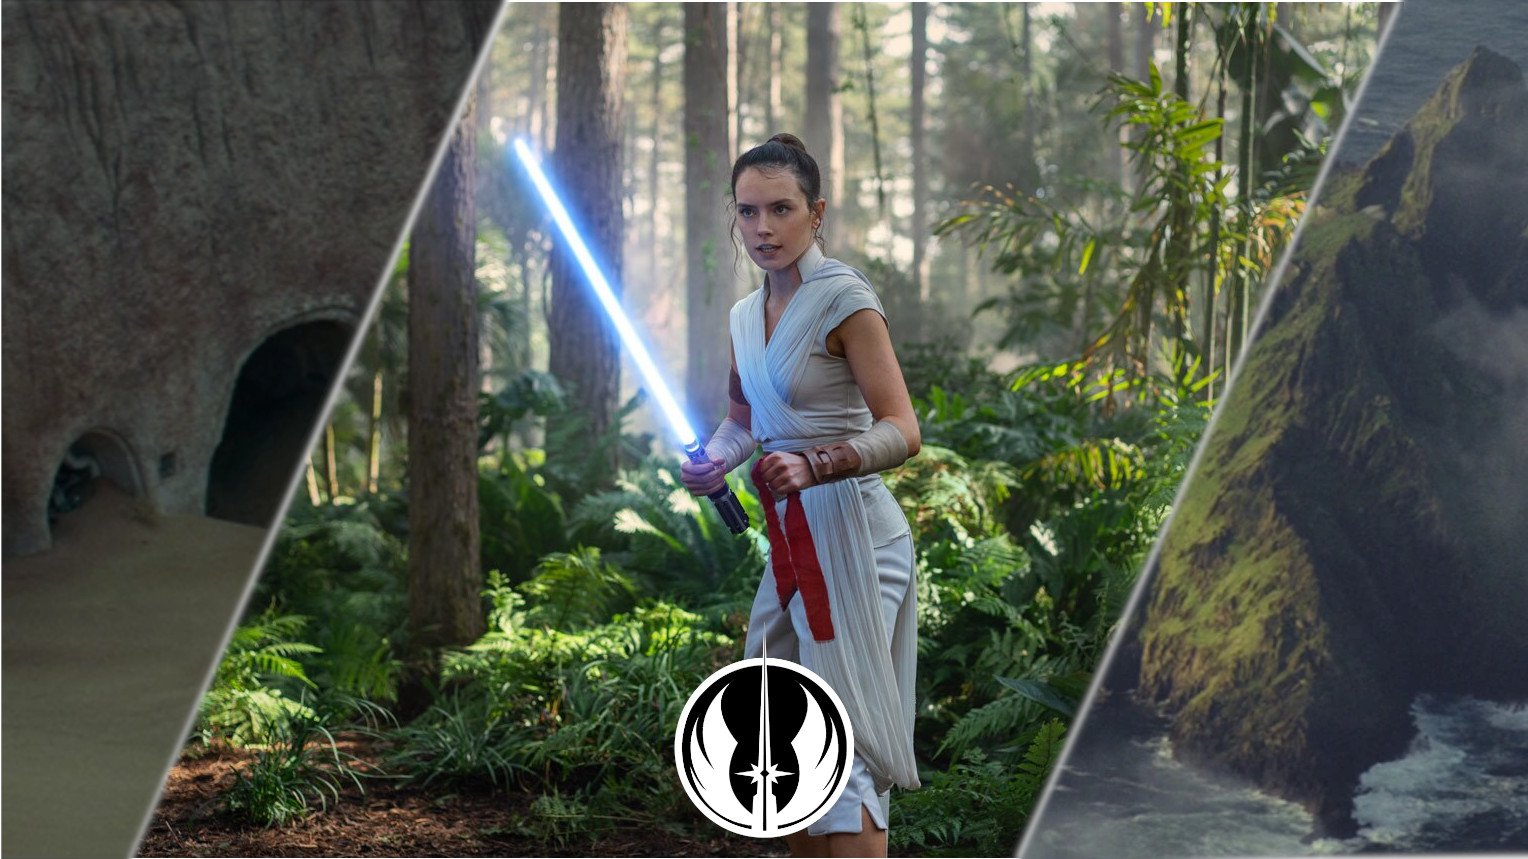 Star Wars: 10 Jedi Cosplays You'll Have to See to Believe